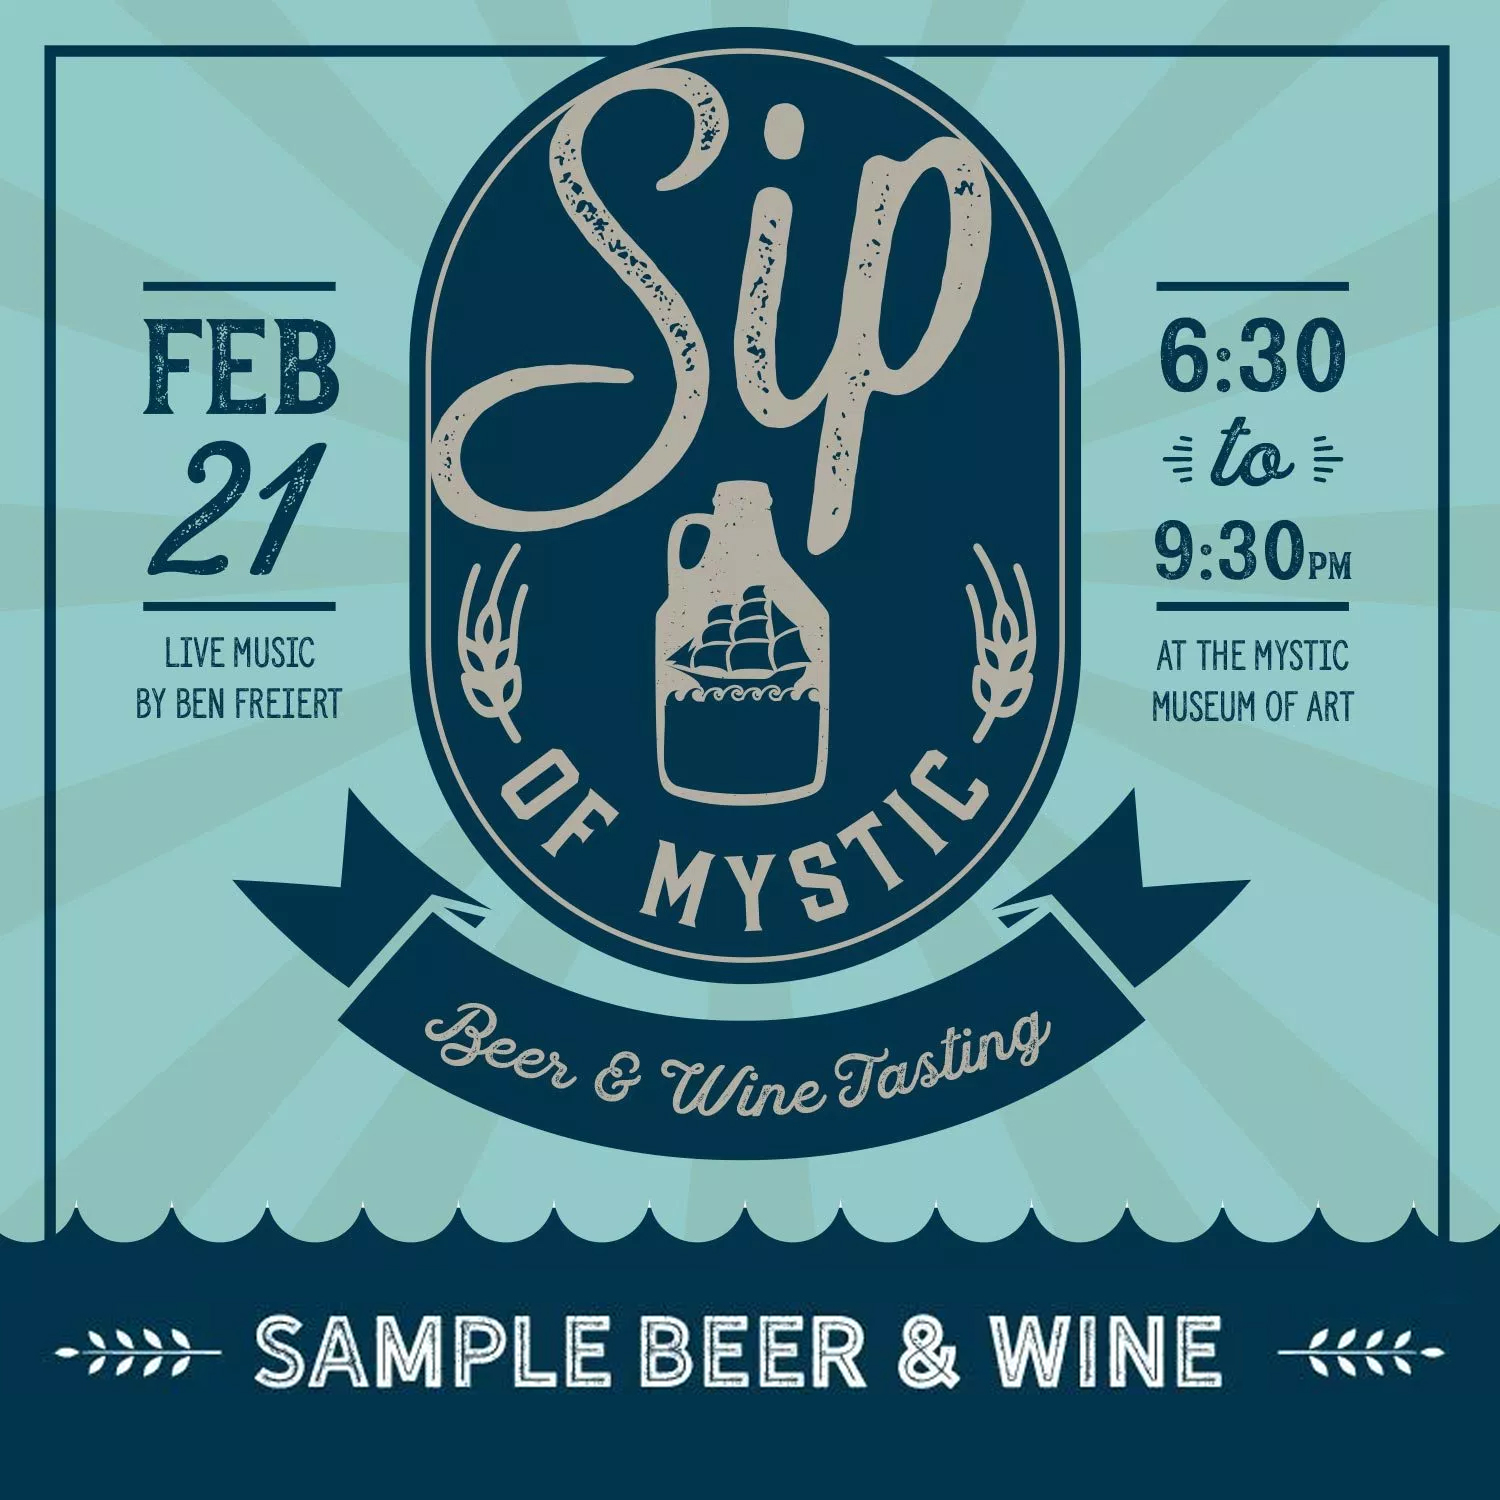 The First Annual Sip of Mystic at the Mystic Museum of Art